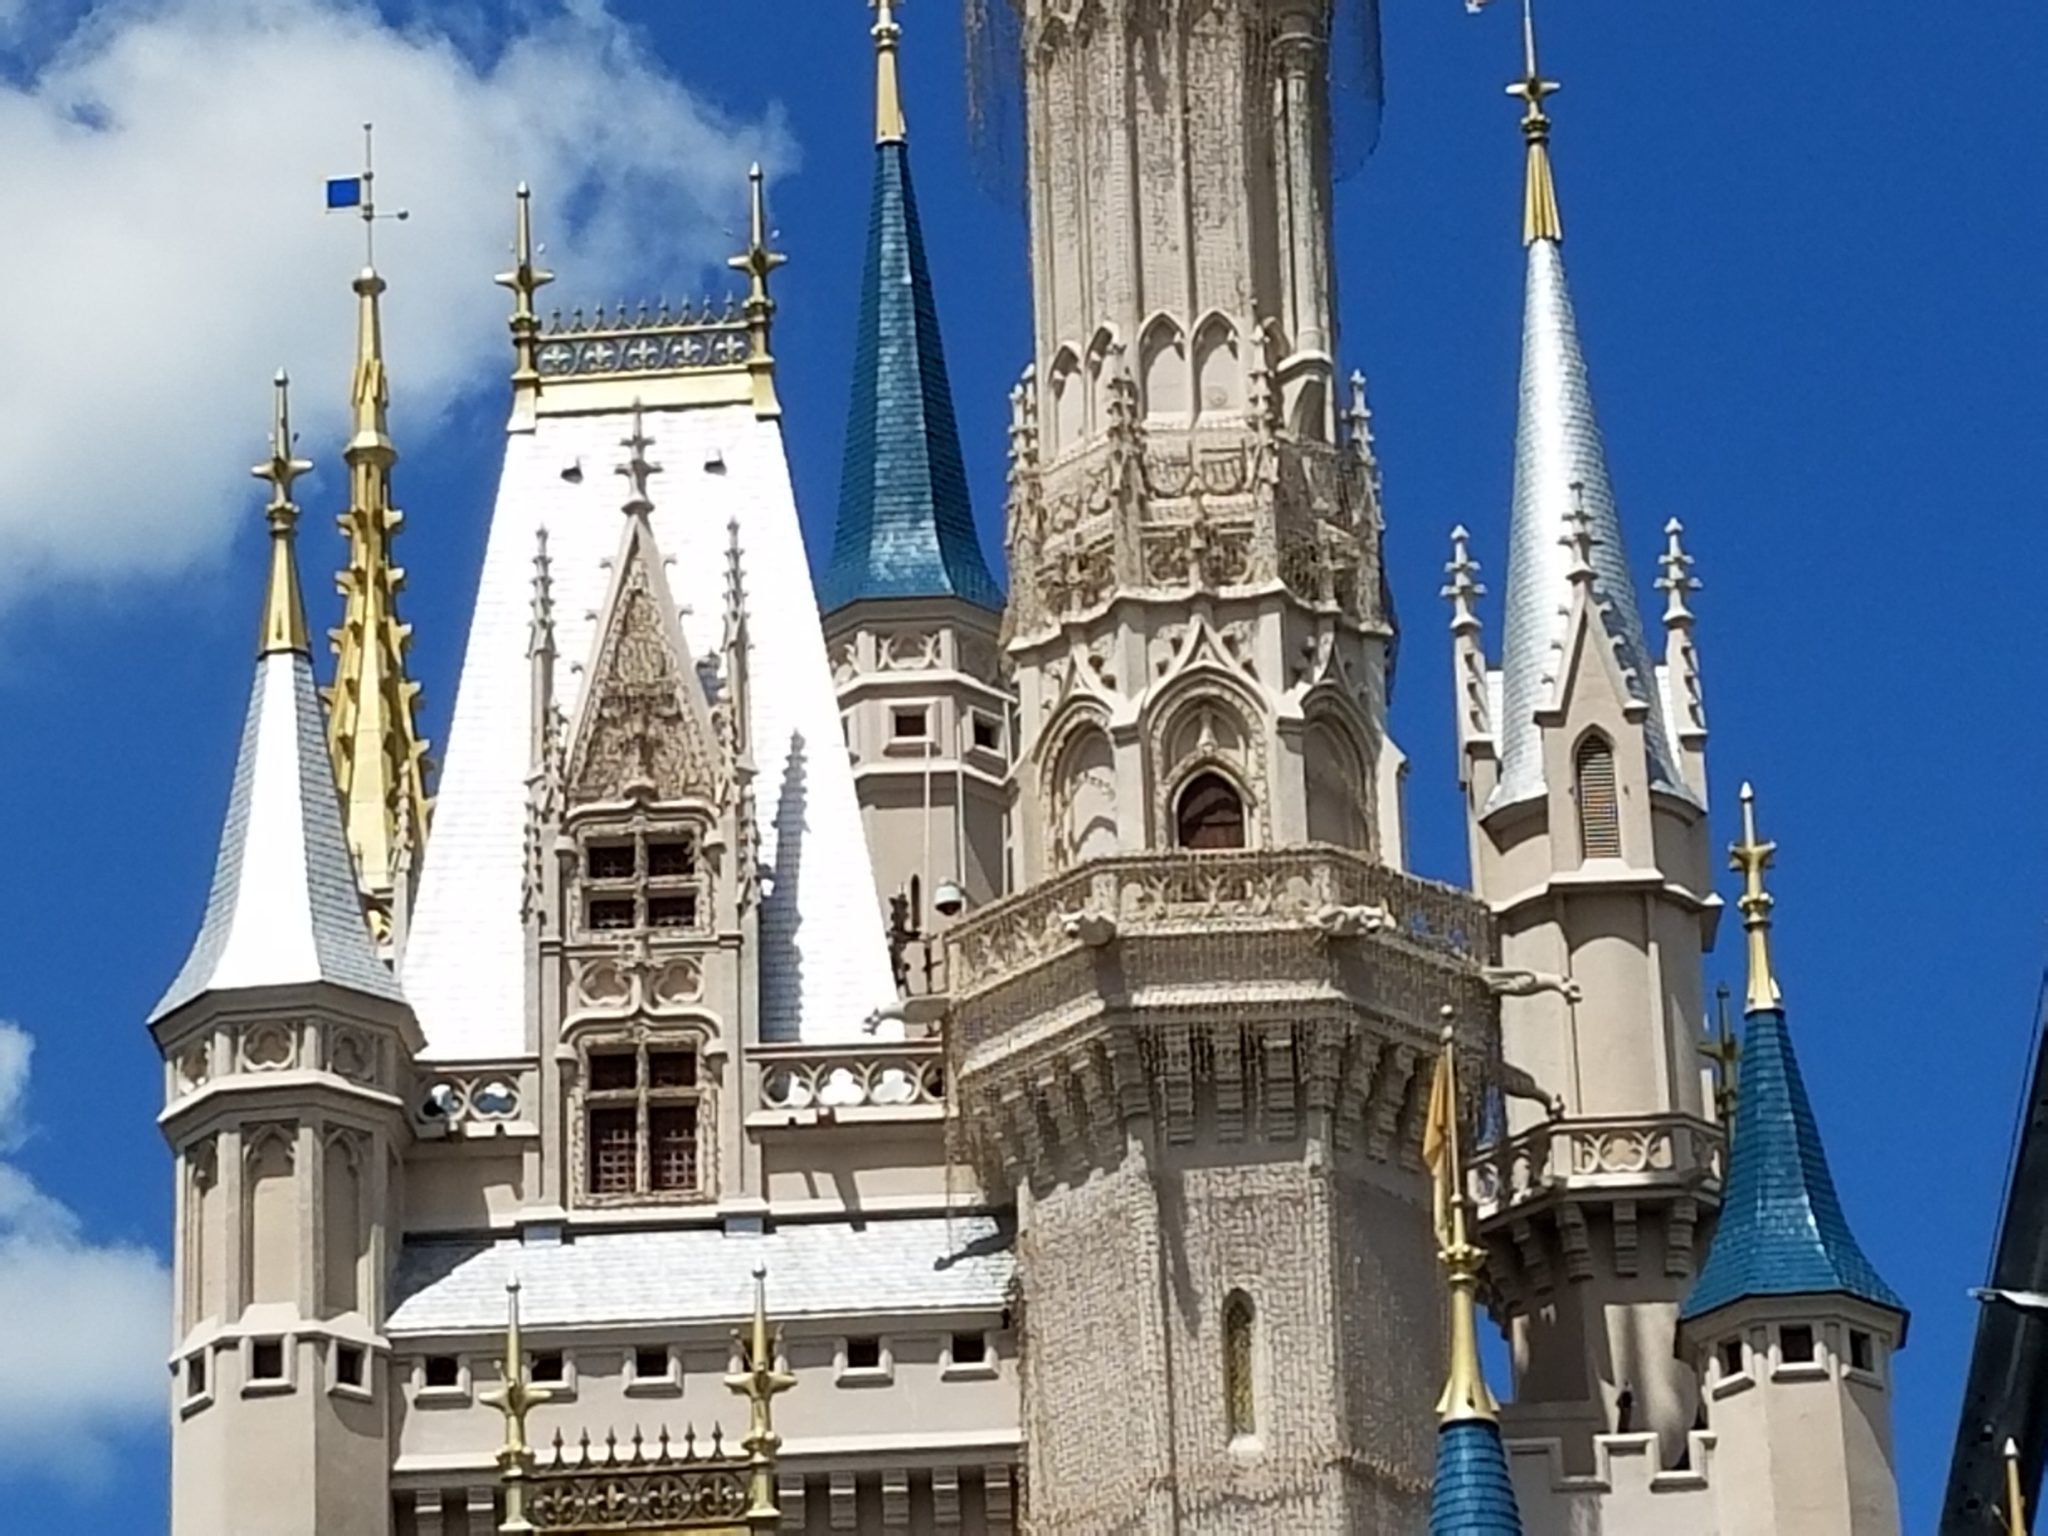 Is Disney Changing The Color of Cinderella’s Castle Spires at the Magic Kingdom?